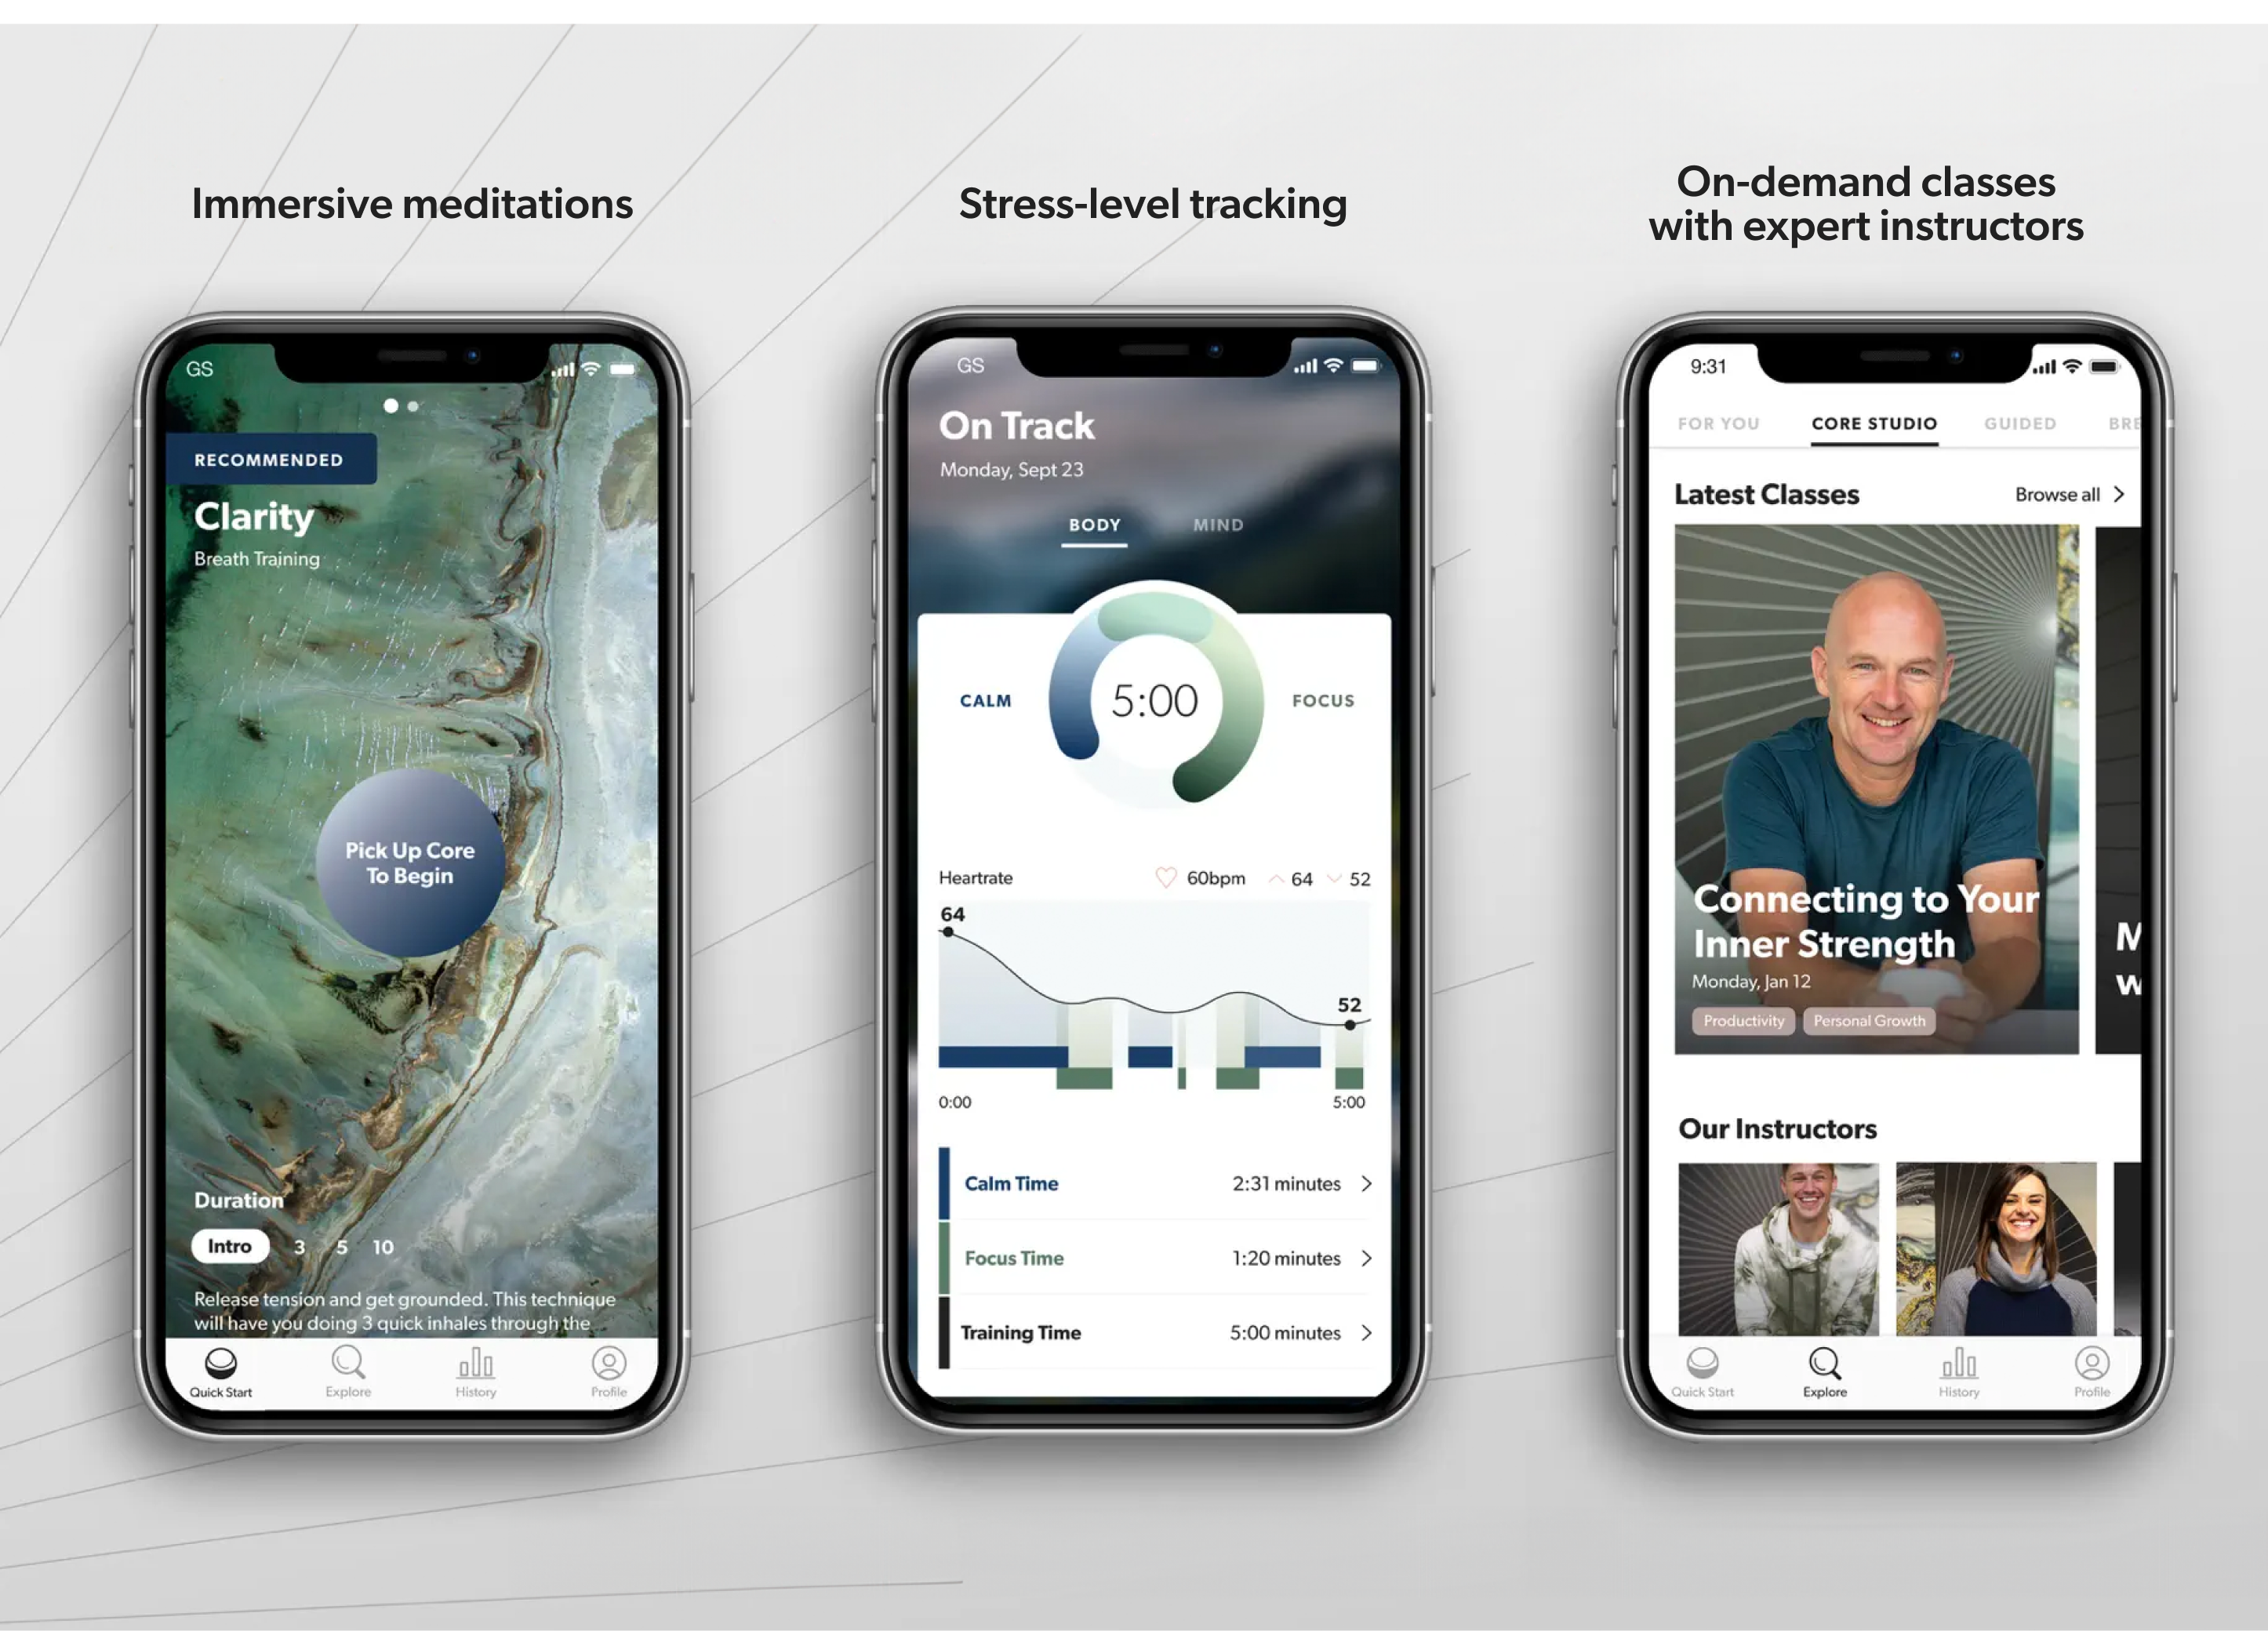 Three images of the Core mobile app demonstrating immersive meditations, stress-level tracking and on-demand classes with expert instructors.